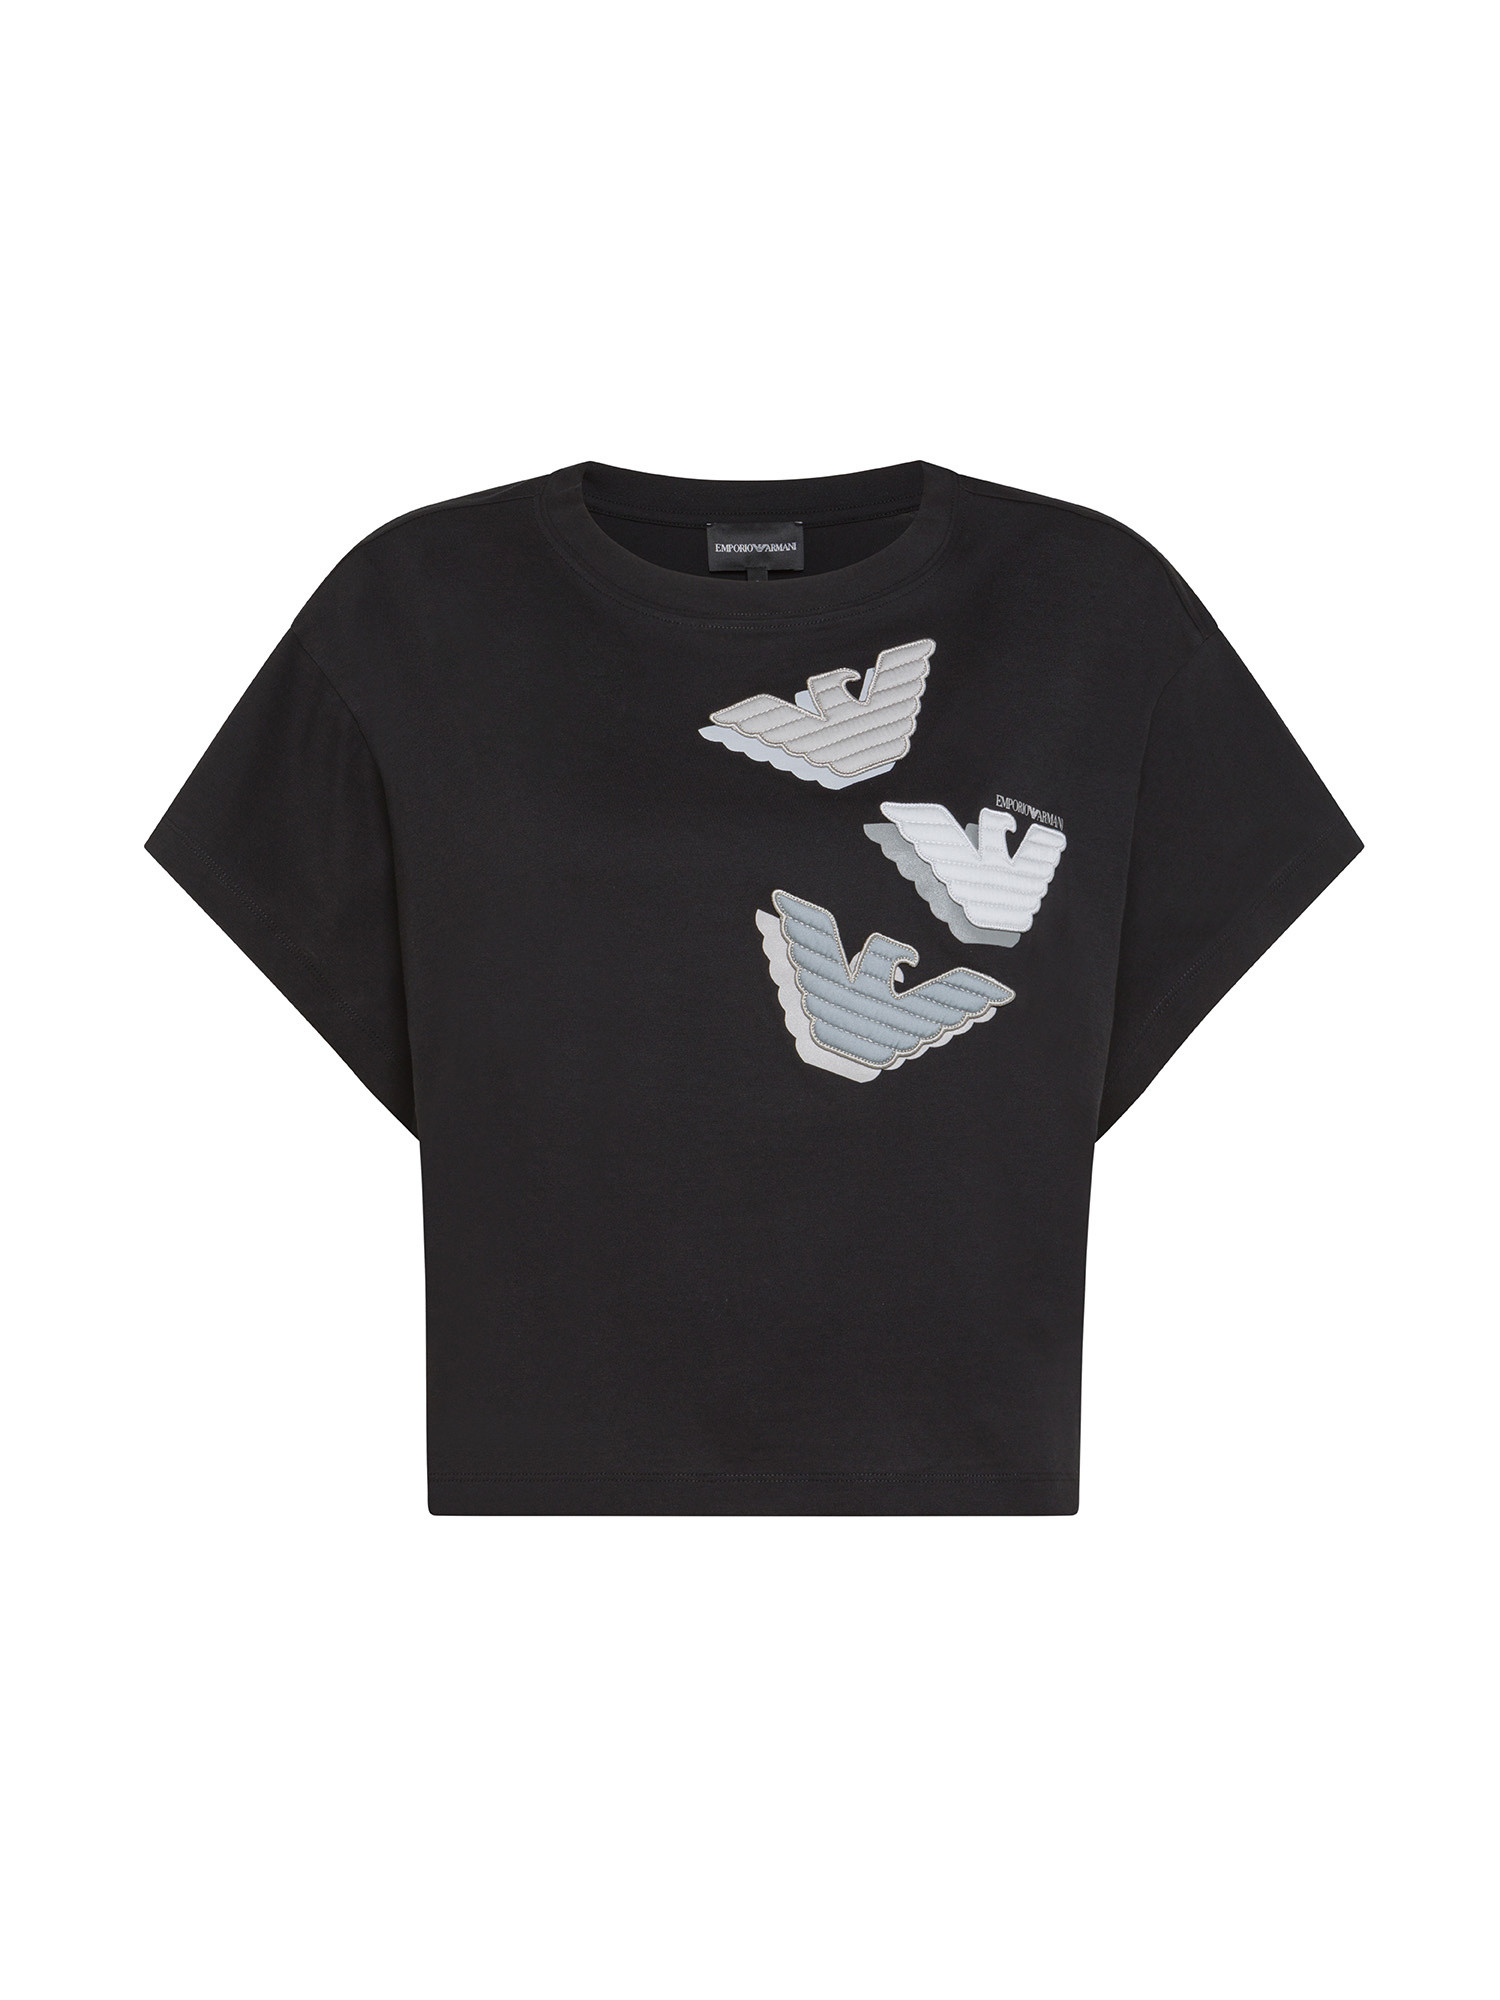 Emporio Armani - Cotton T-shirt with eagle logo patch, Black, large image number 0